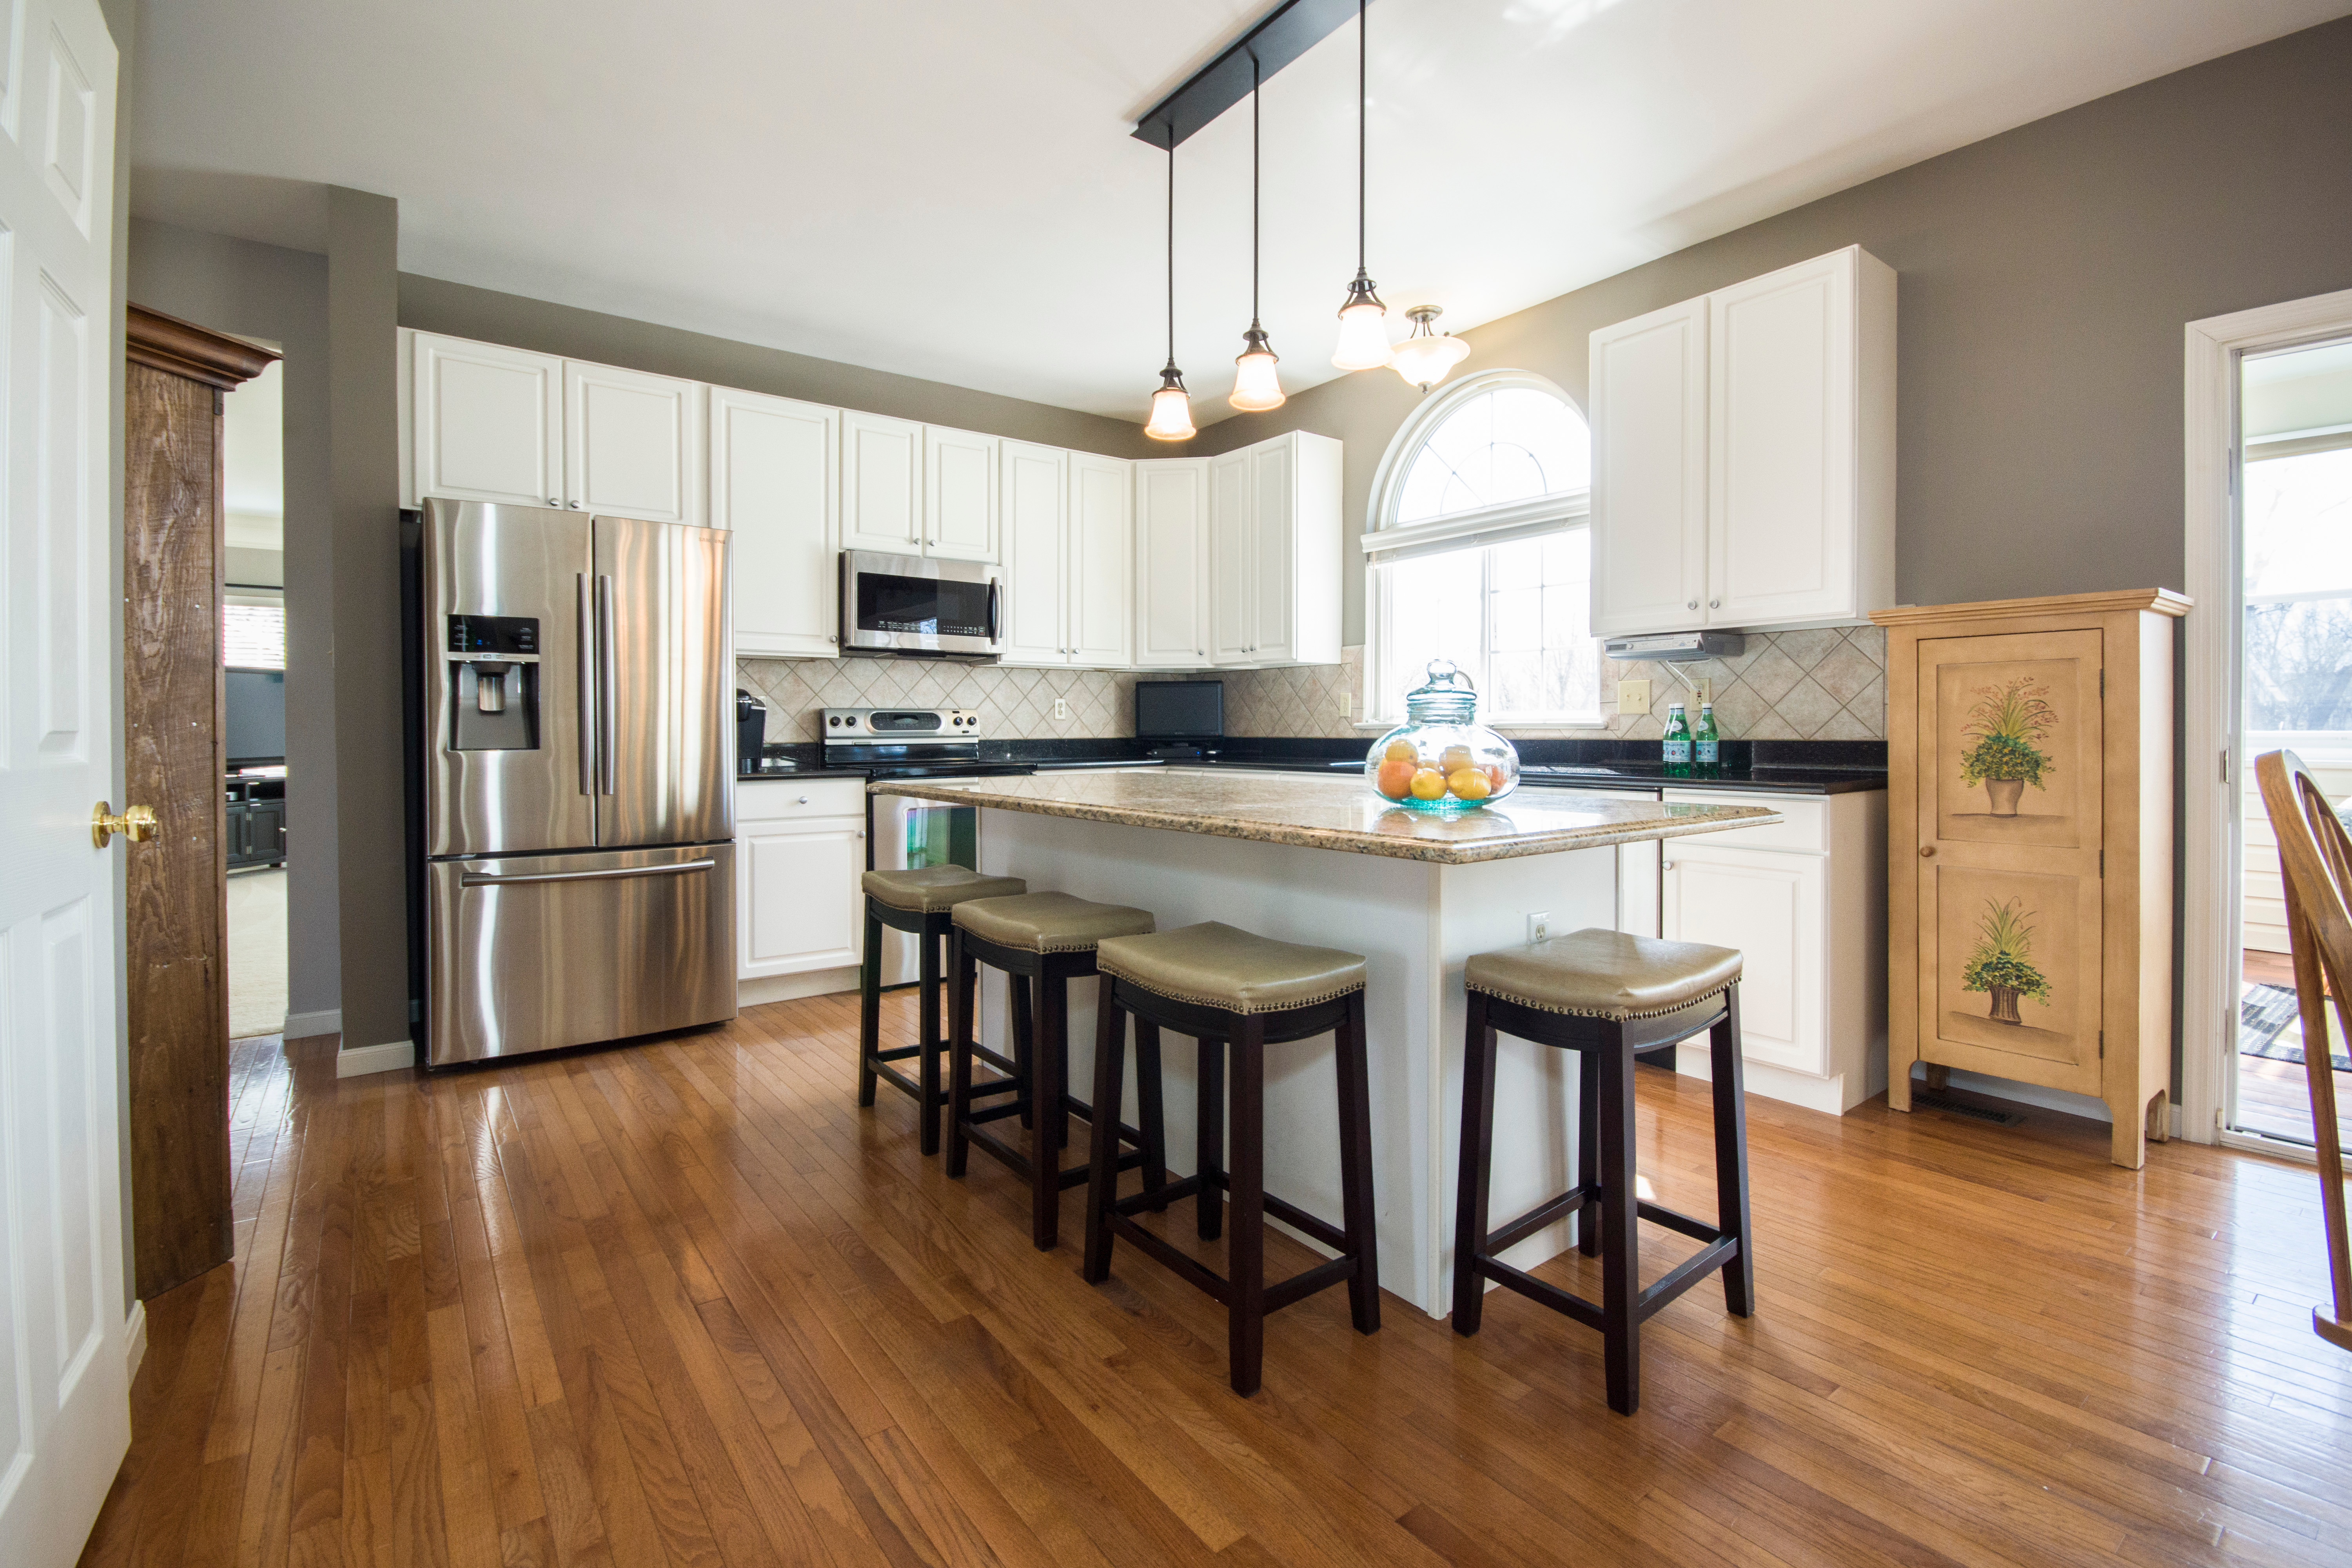 Why Should You Hire A Professional Kitchen Cabinet Painter